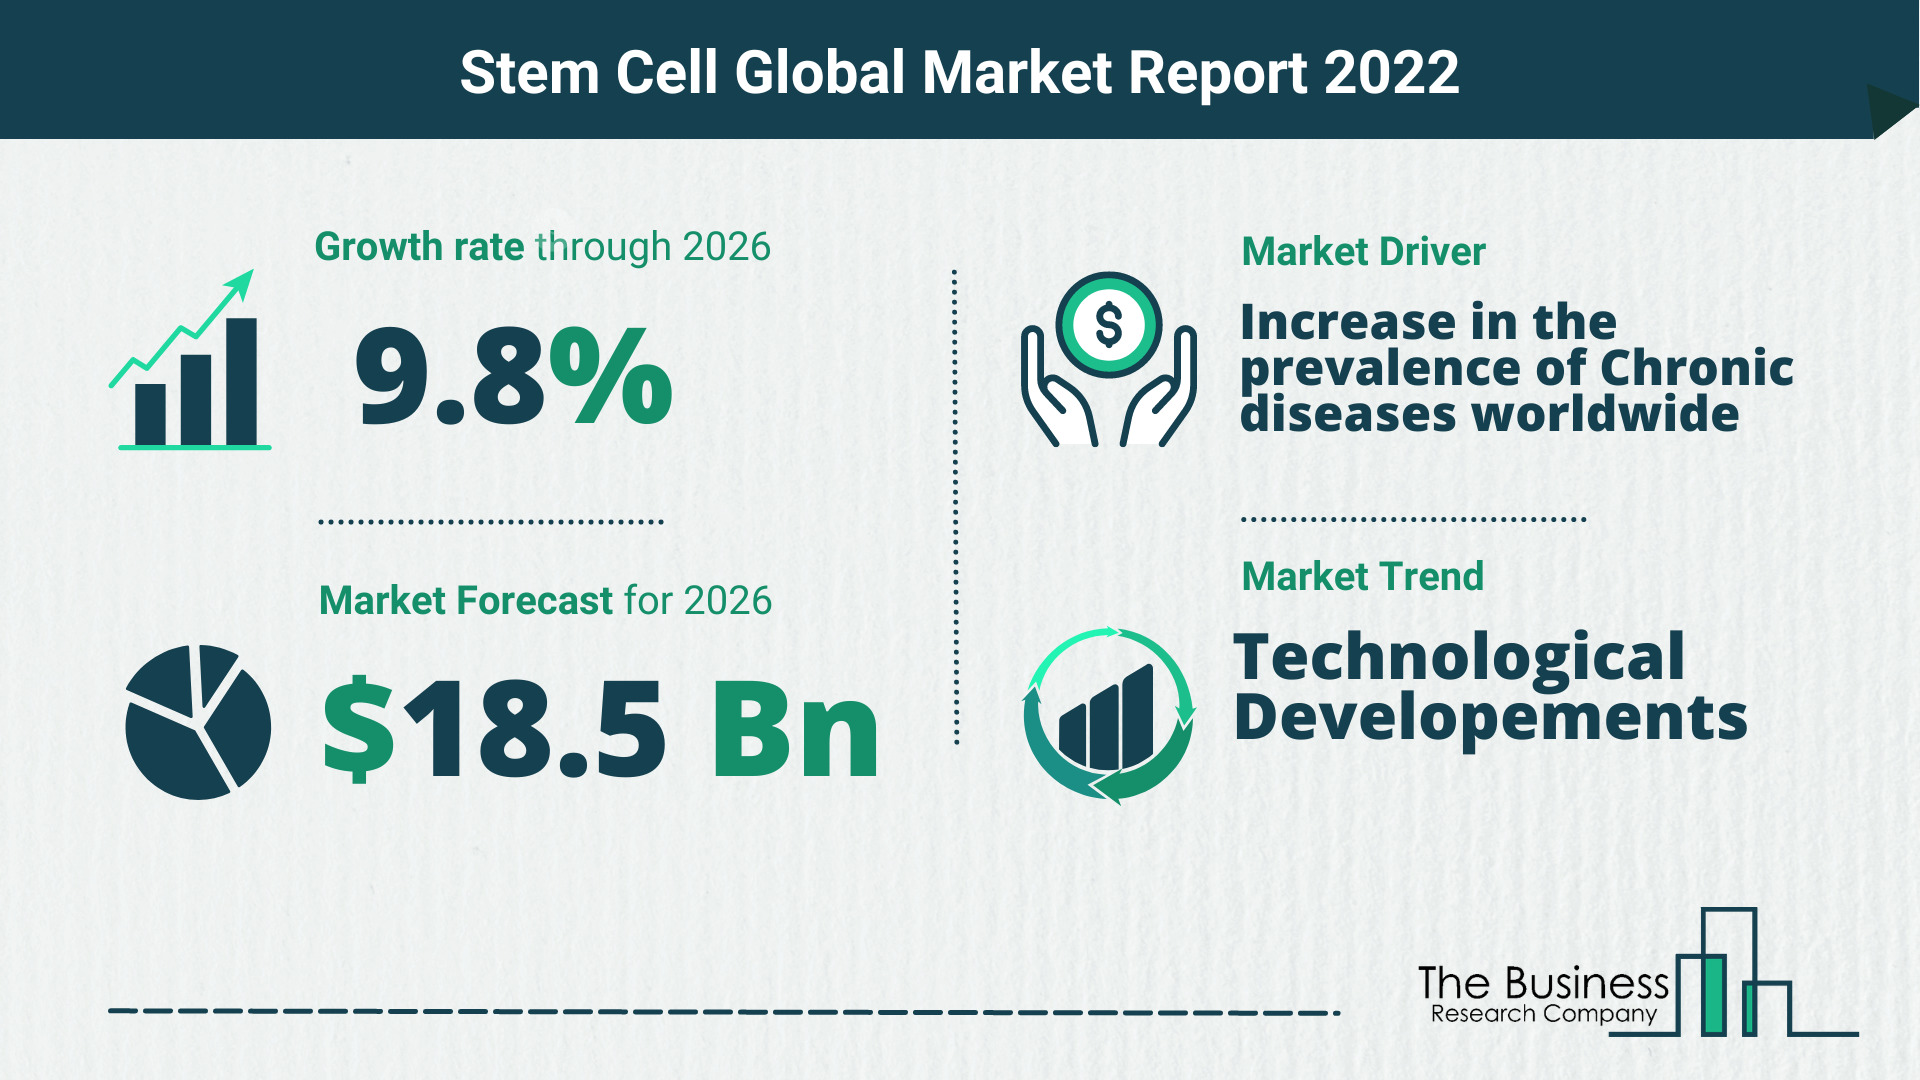 How Will The Stem Cell Market Grow In 2022?